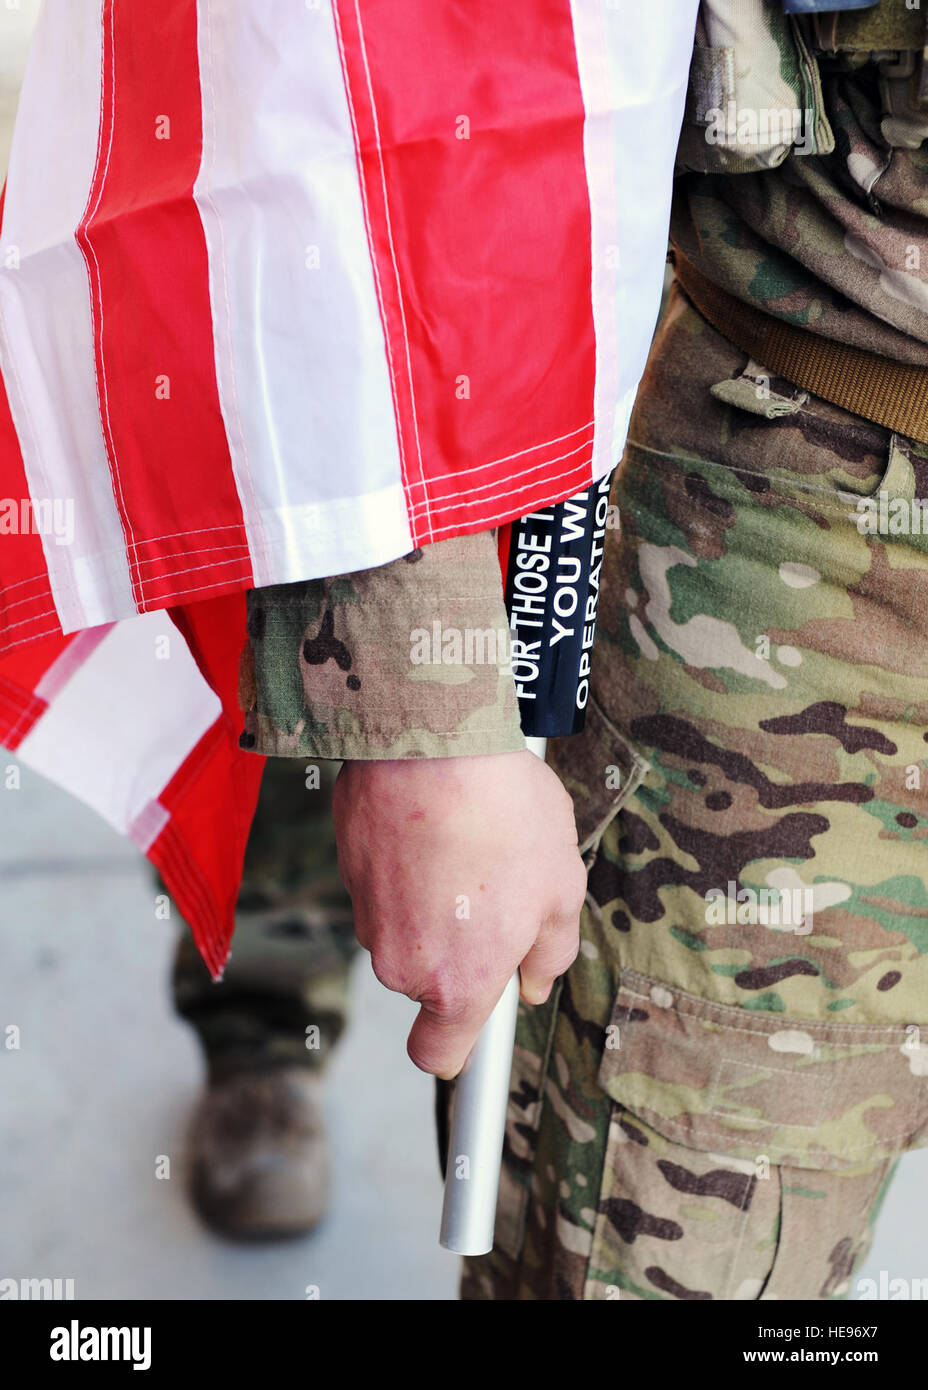 A U.S. Air Force Airman assigned to the 83rd Expeditionary Rescue Squadron holds a U.S. flag bearing the names of seven special operators who were killed March 4, 2002, during Operation Anaconda: U.S. Air Force Senior Airman Jason Cunningham, U.S. Army Cpl. Matthew Commons, U.S. Army Spc. Marc Anderson, U.S. Army Sgt. Phillip Svitak, U.S. Army Sgt. Bradley Crose, U.S. Navy Petty Officer 1st Class Neil Roberts and U.S. Air Force Tech. Sgt. John Chapman, March 3, 2015 at Bagram Air Field, Afghanistan. Service members from all branches conducted a 24-hour vigil run and a retreat ceremony to honor Stock Photo